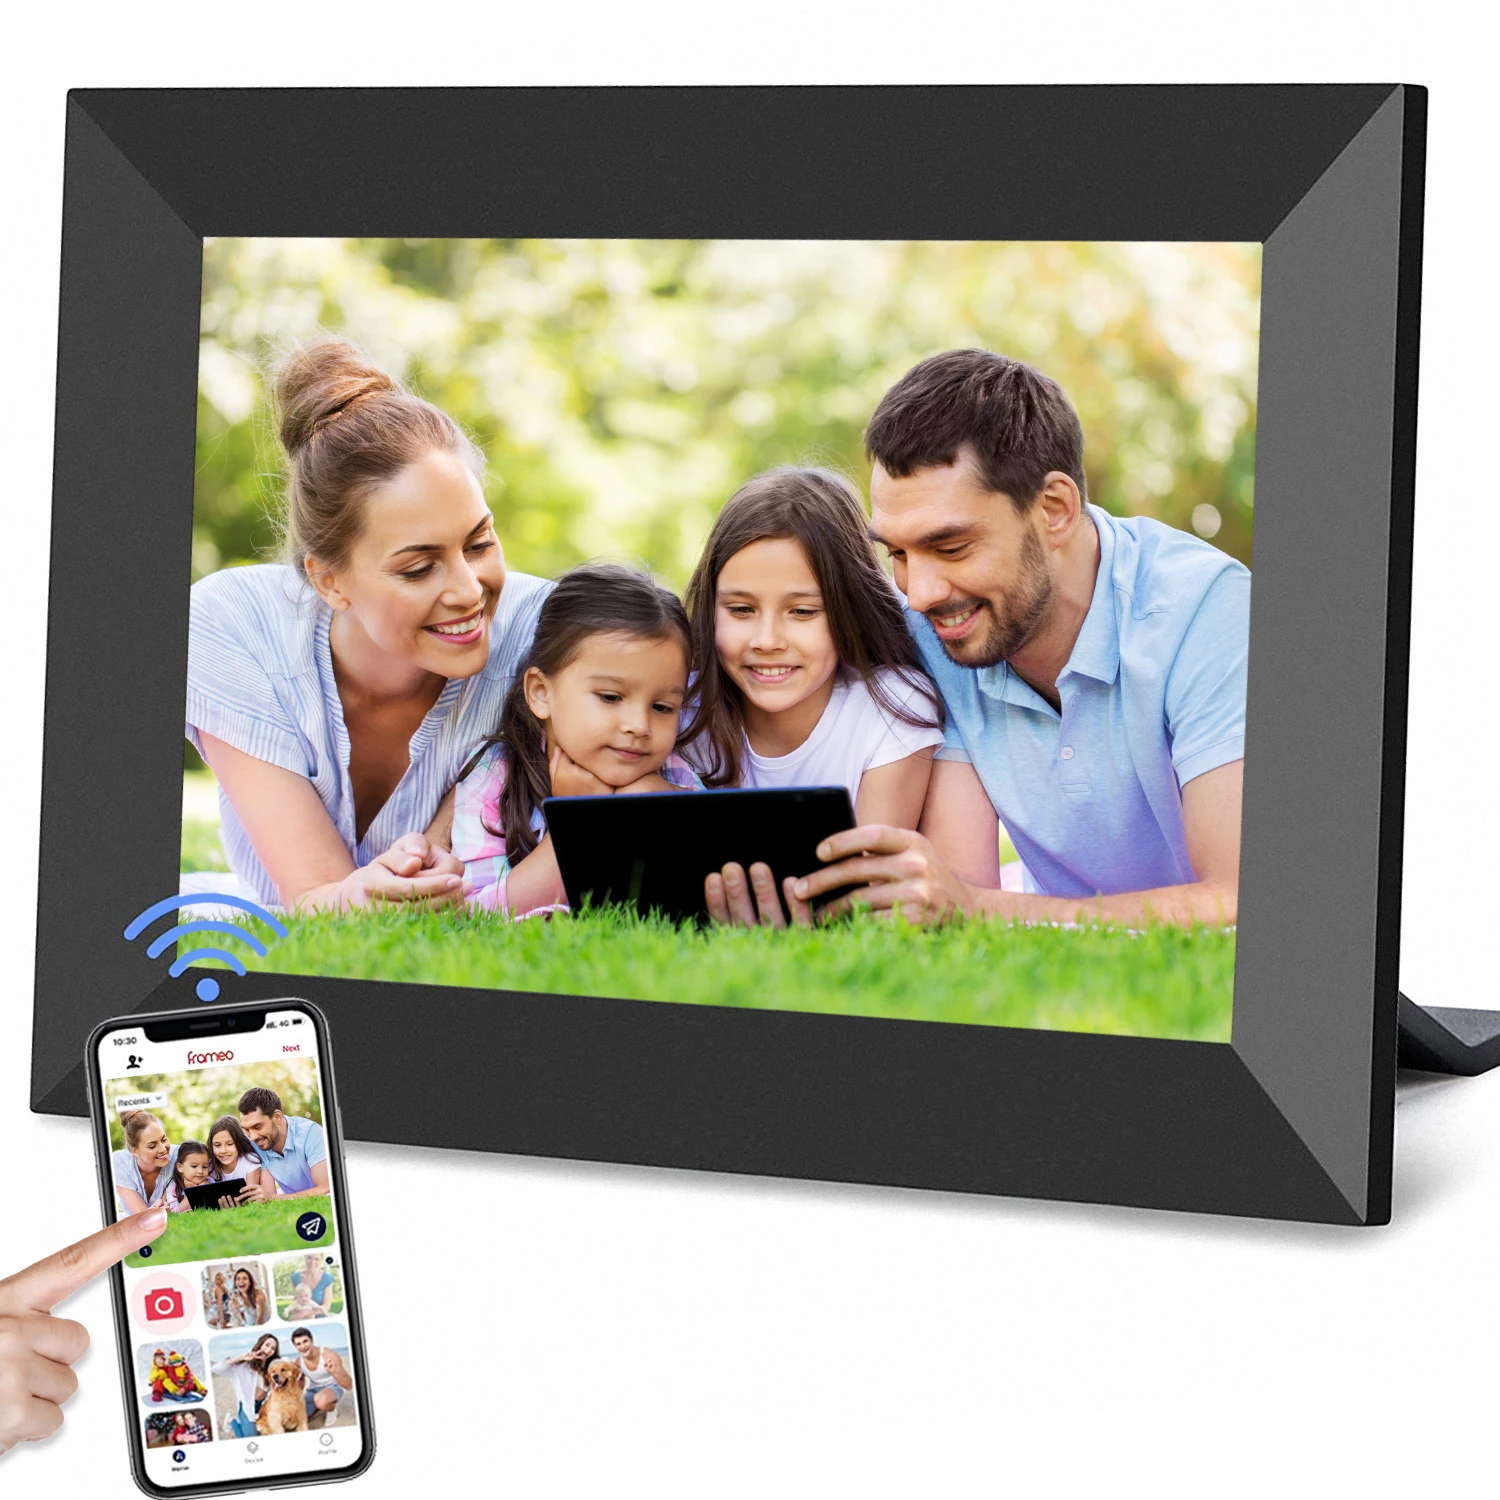 Hot Sale Digital Picture Frames 7 inch Touch Screen Digital Photo Frame Share Photos and Videos